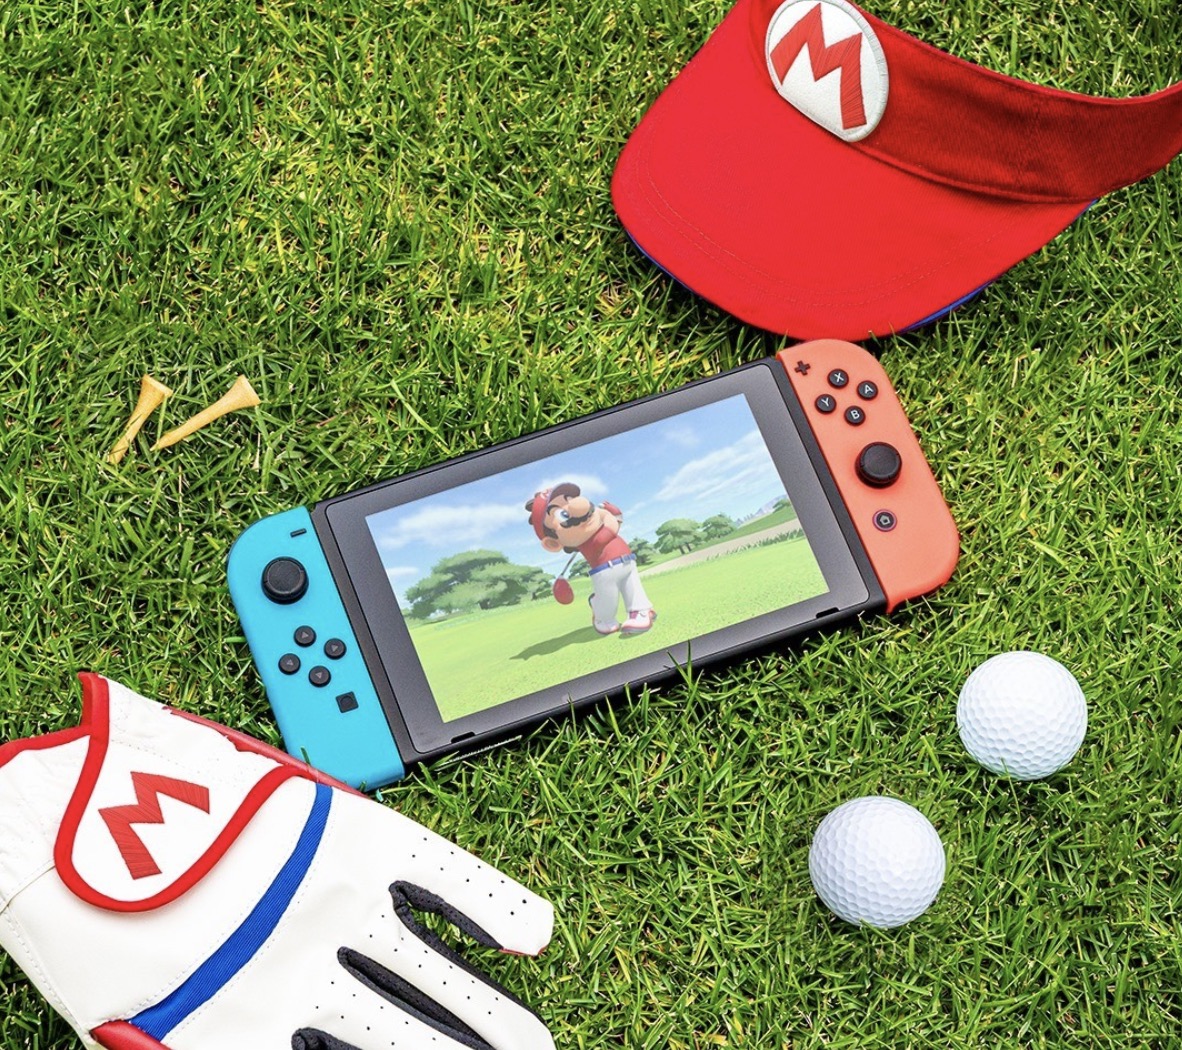 A Game Weir View - Mario Super the Toronto Rush With Mike Of Golf: VIBE